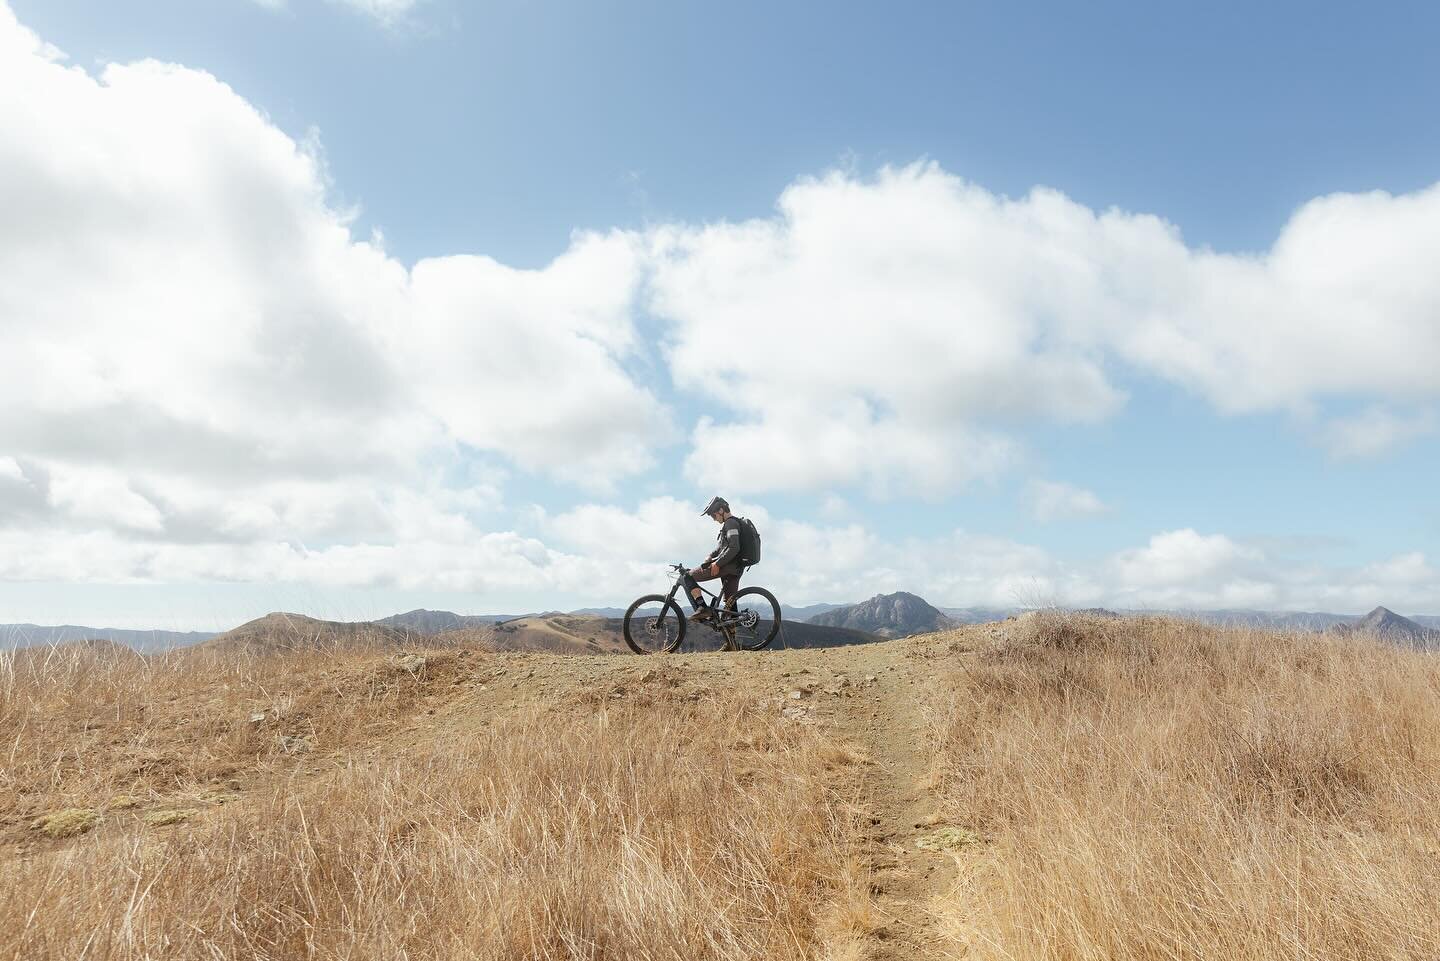 Itching to be on the bike as much as possible these days

📷: @molly_haar 

#mtb #sanluisobispo